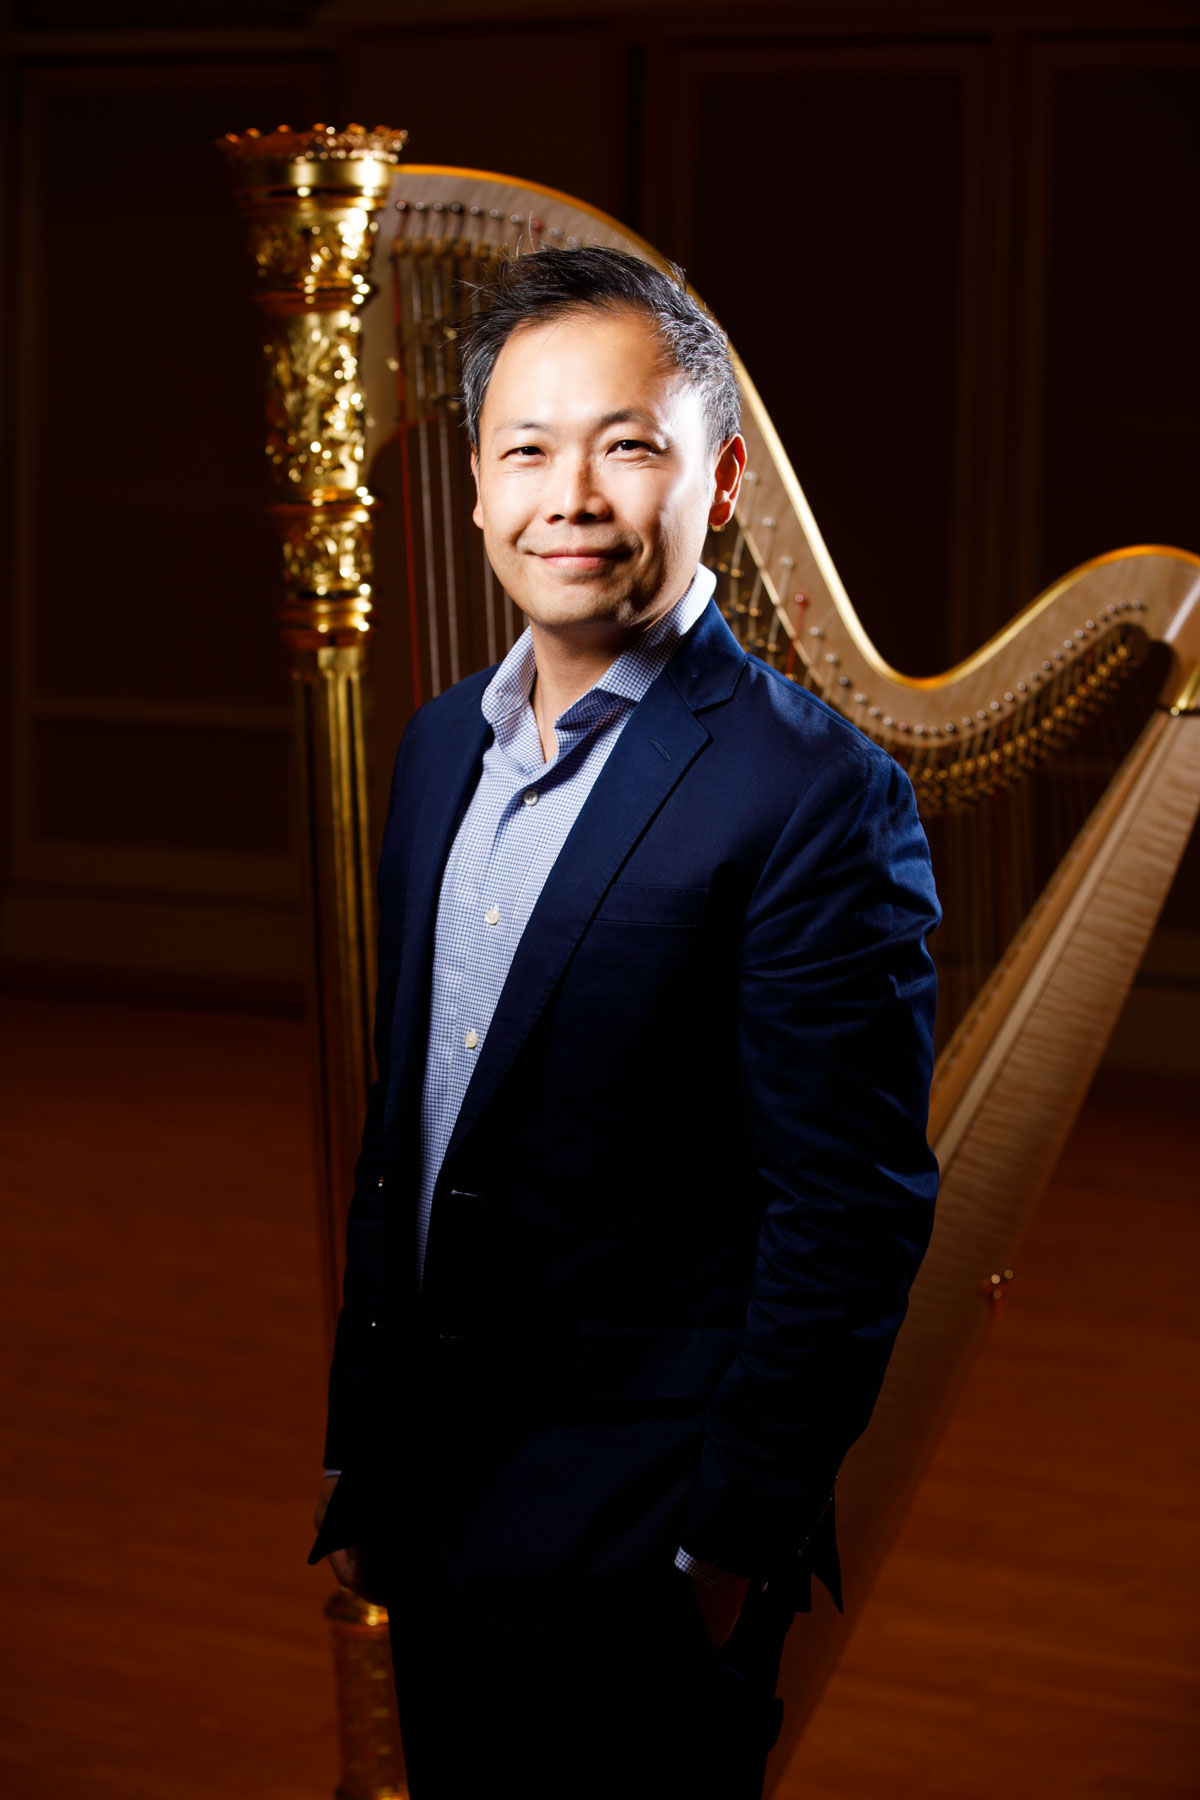 USA International Harp Competition Board of Directors member Charles Lin poses for a portrait during the 11th USA International Harp Competition at Indiana University in Bloomington, Indiana on Saturday, July 13, 2019. (Photo by James Brosher)